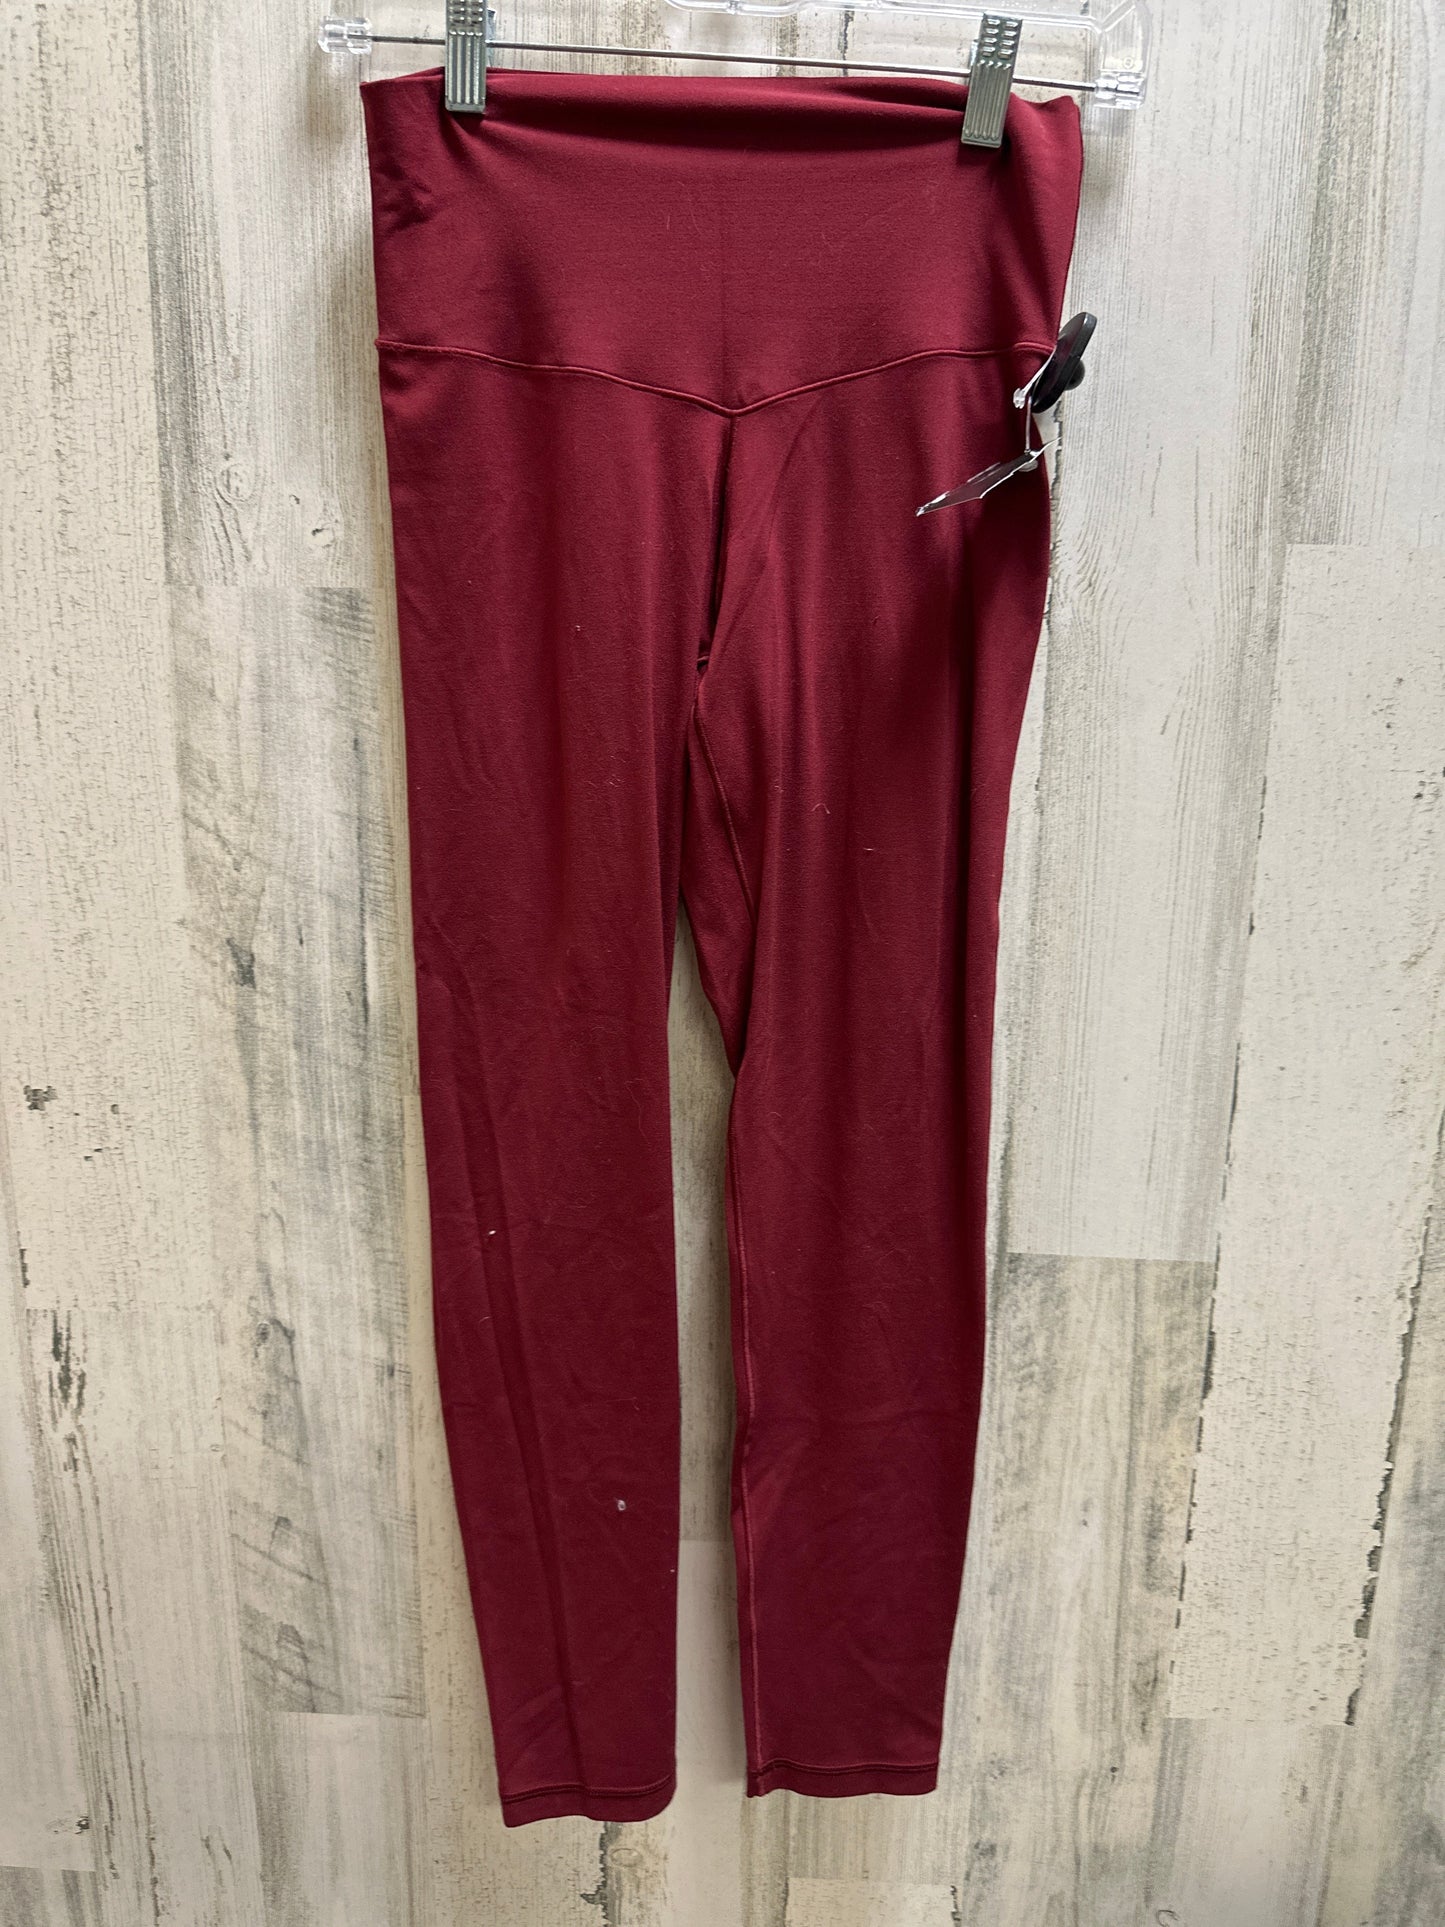 Red Athletic Leggings Aerie, Size M